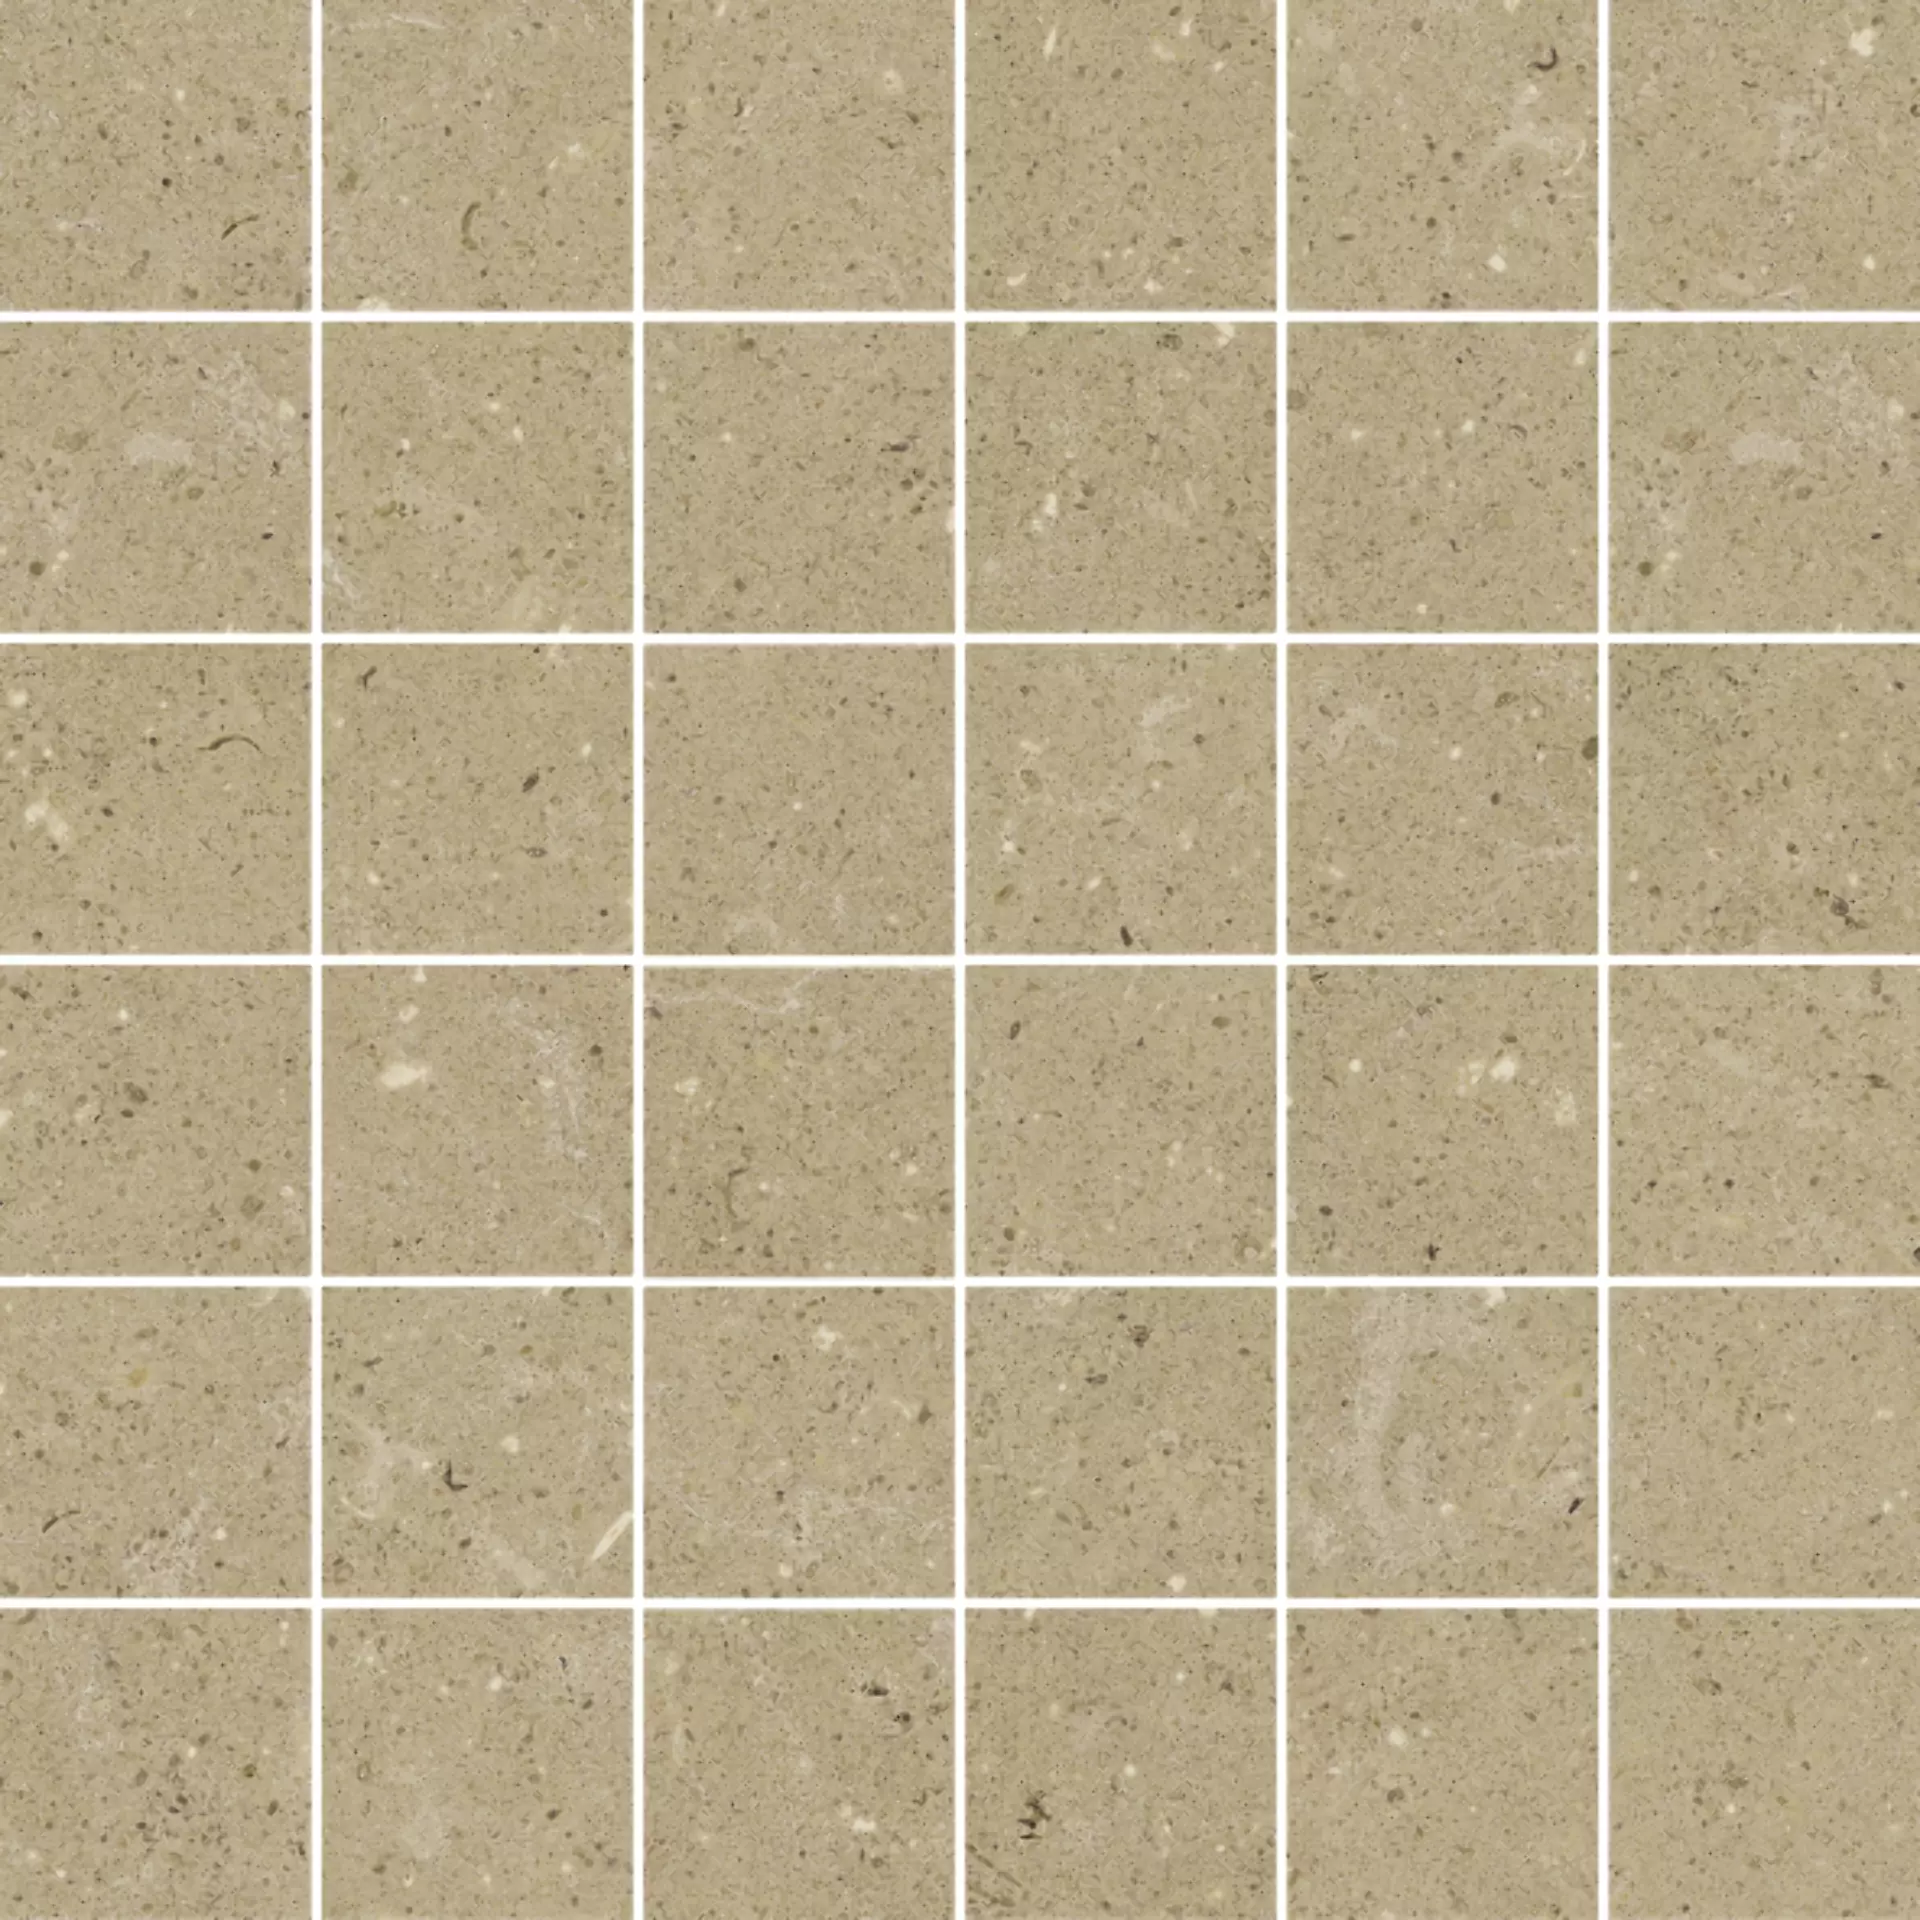 Del Conca Hwd Wild Beige Hwd Naturale Mosaic G3WD01MO 30x30cm rectified 8,5mm